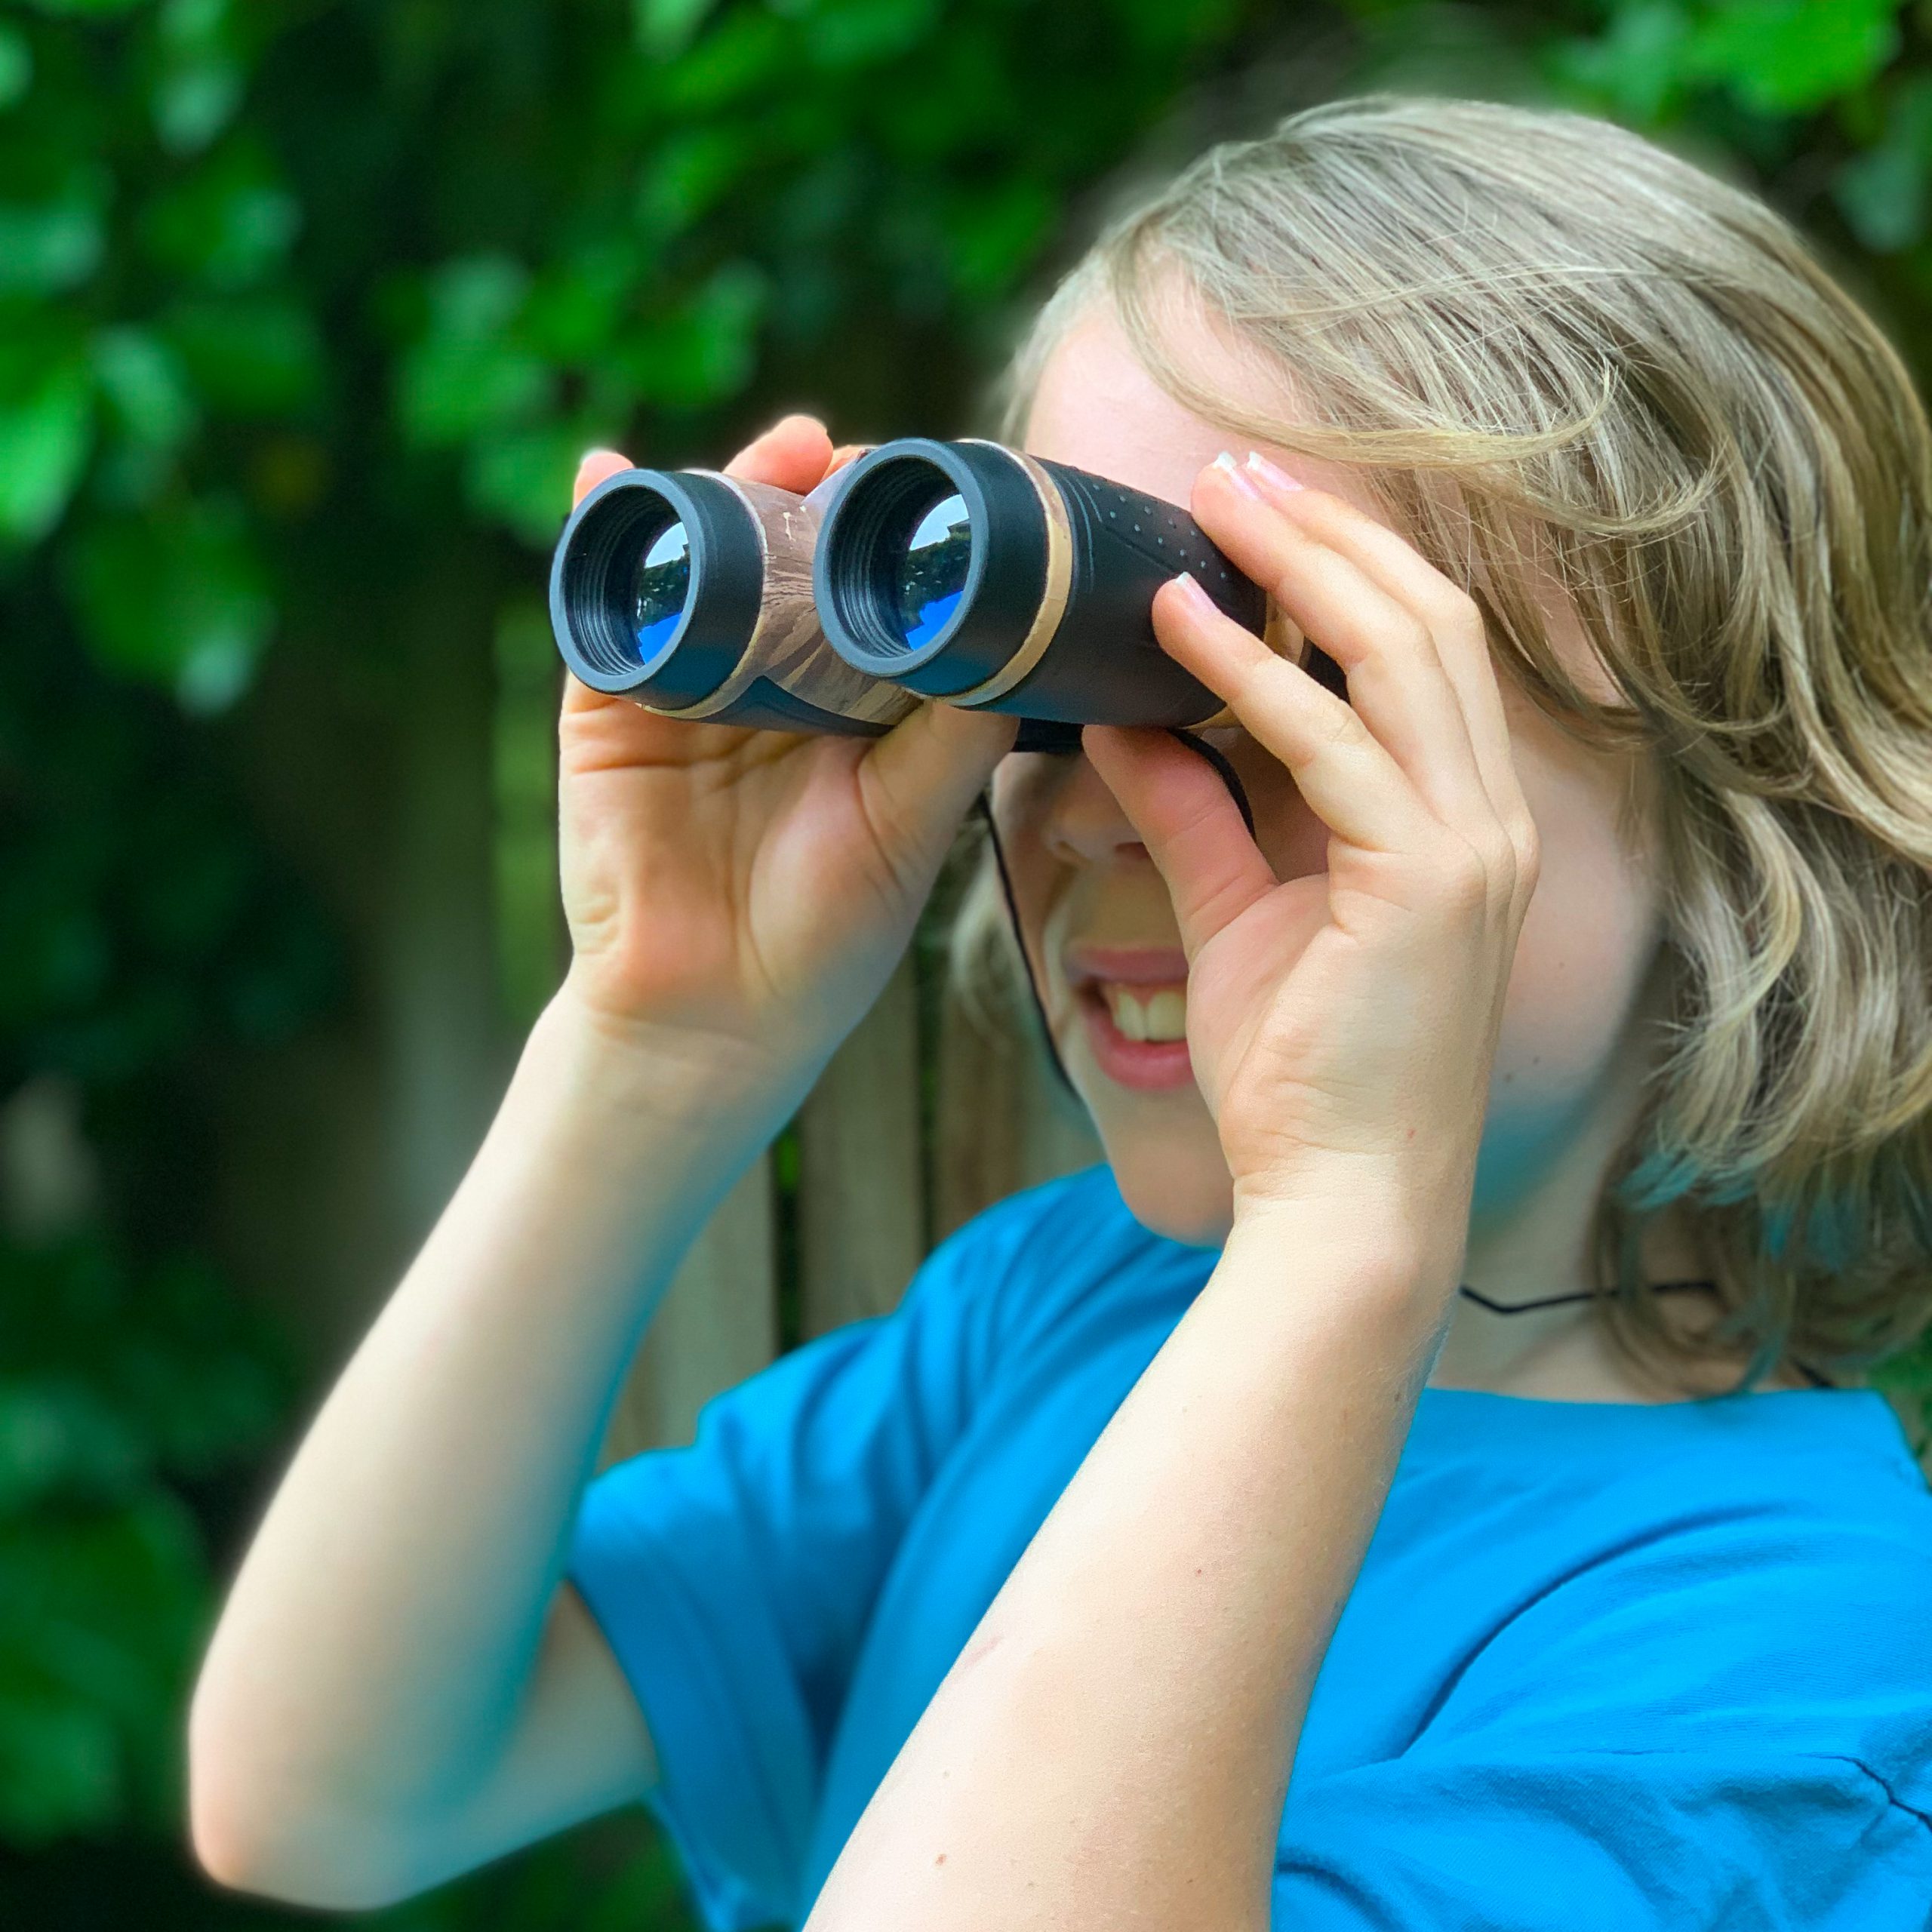 A close-up of a young boy wearing a blue t-shirt and holding a set of kids binoculars to his eyes. He's smiling at what he sees and there is lush Gree foliage in the background.